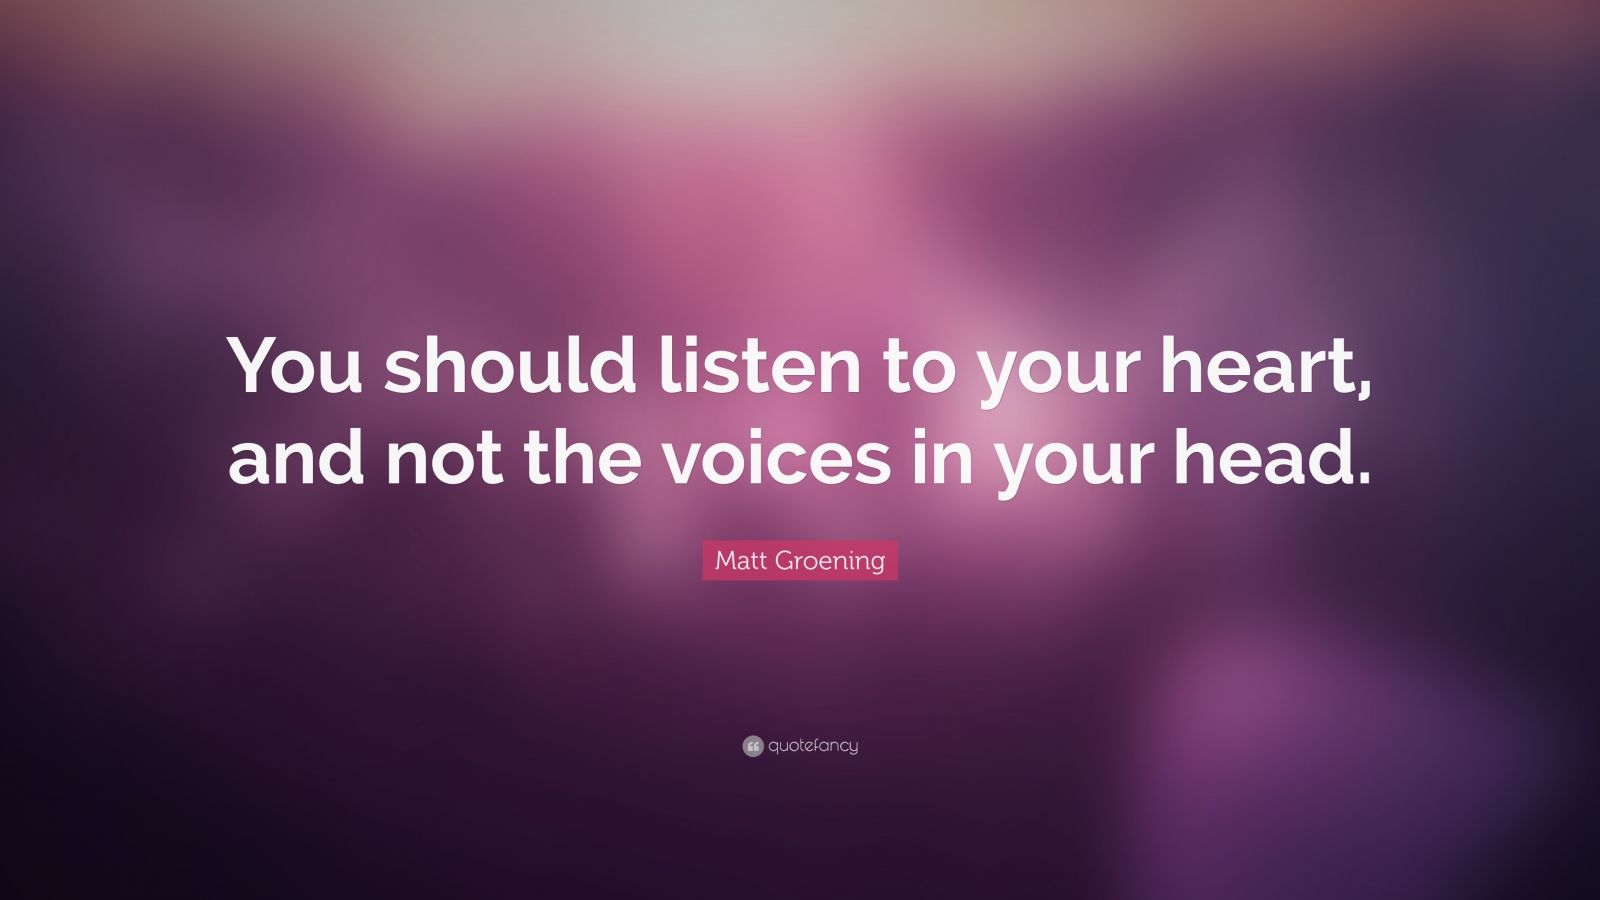 Matt Groening Quote: “You should listen to your heart, and not the ...